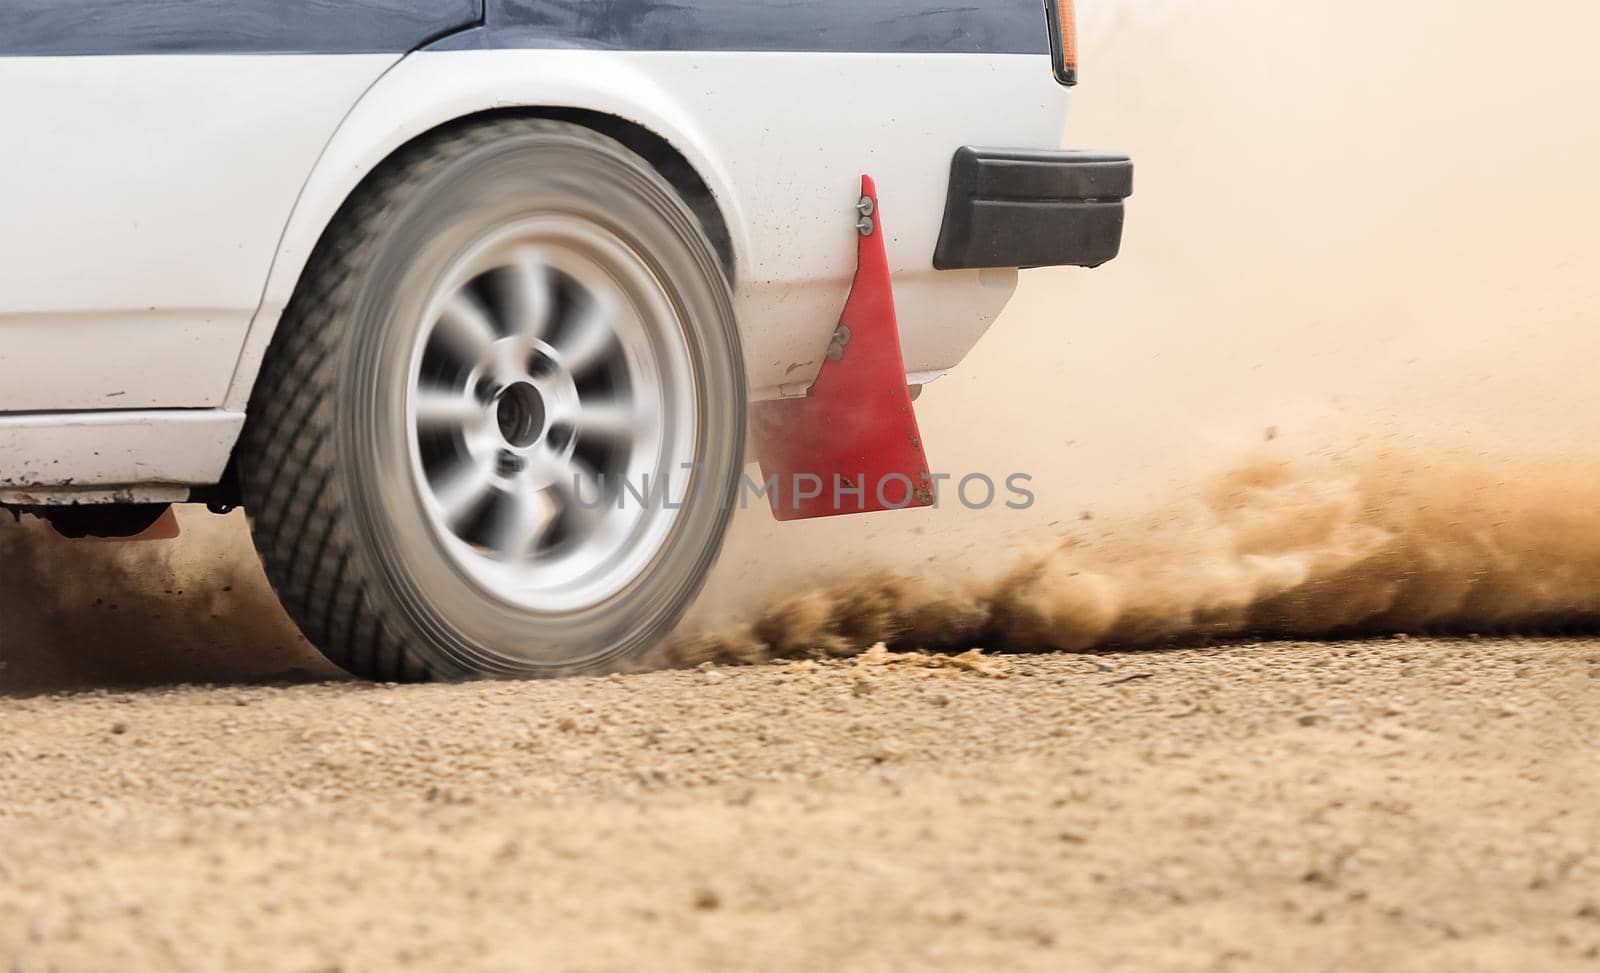 Rally car in dirt track by toa55